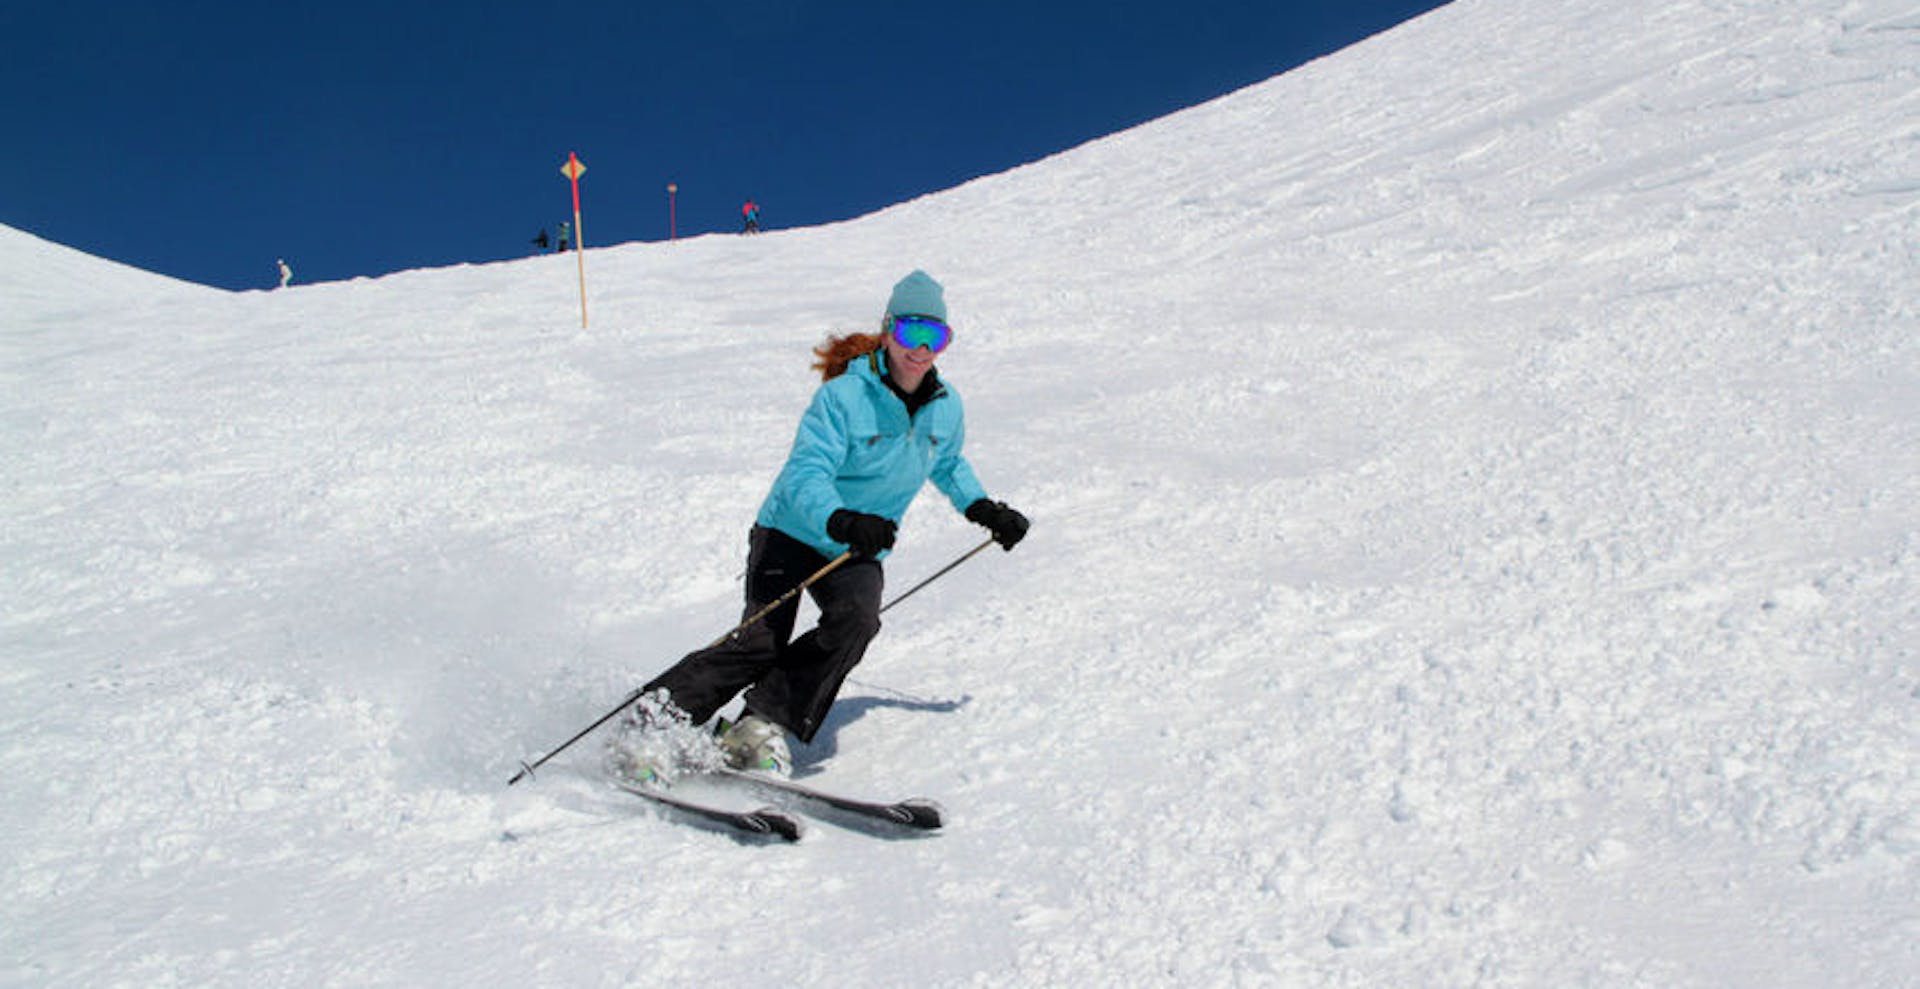 Skiers have access to the expansive Ski Arlberg area